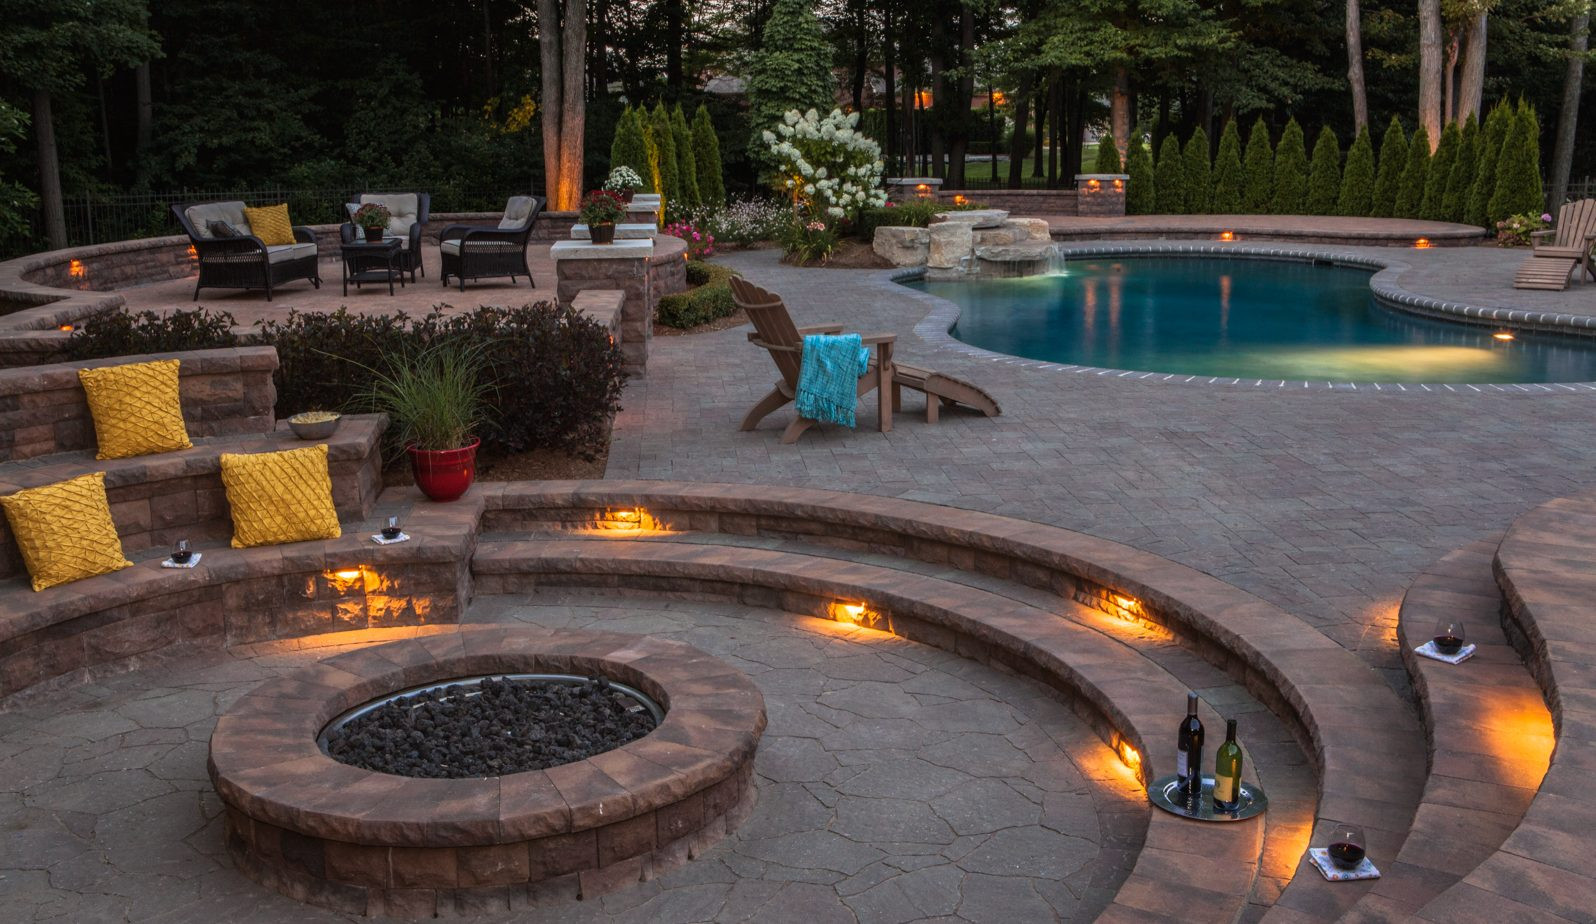 Fire Pit And Patio
 Turn Up the Heat with These Cozy Fire Pit Patio Design